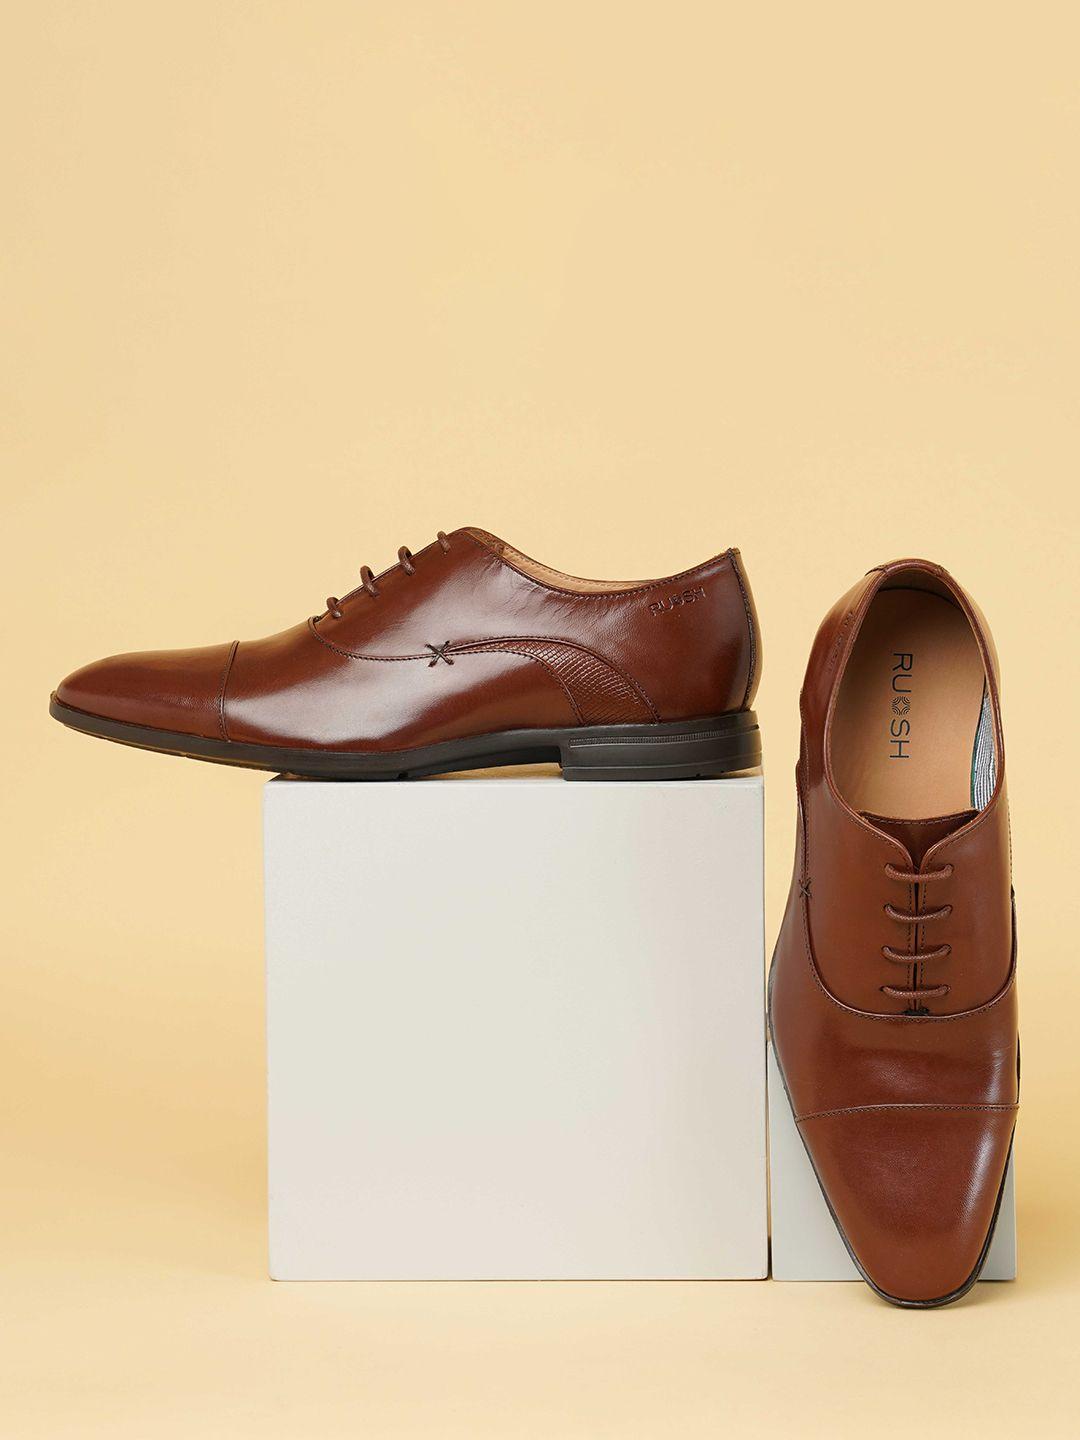 ruosh-textured-formal-oxford-shoes